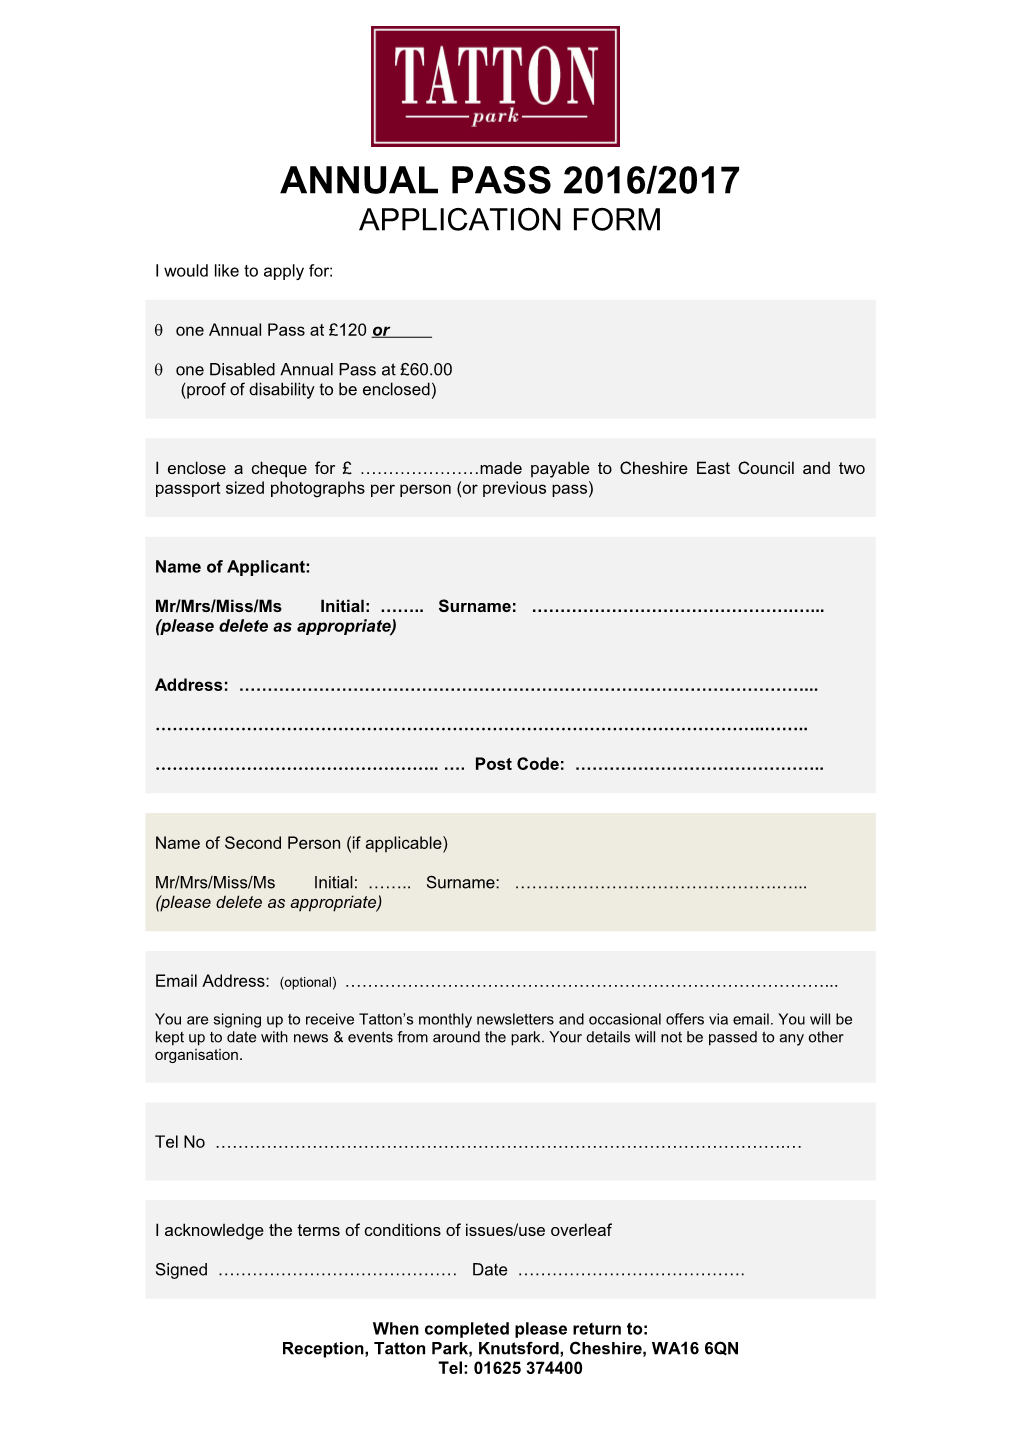 Annual Pass 2016 Application Form